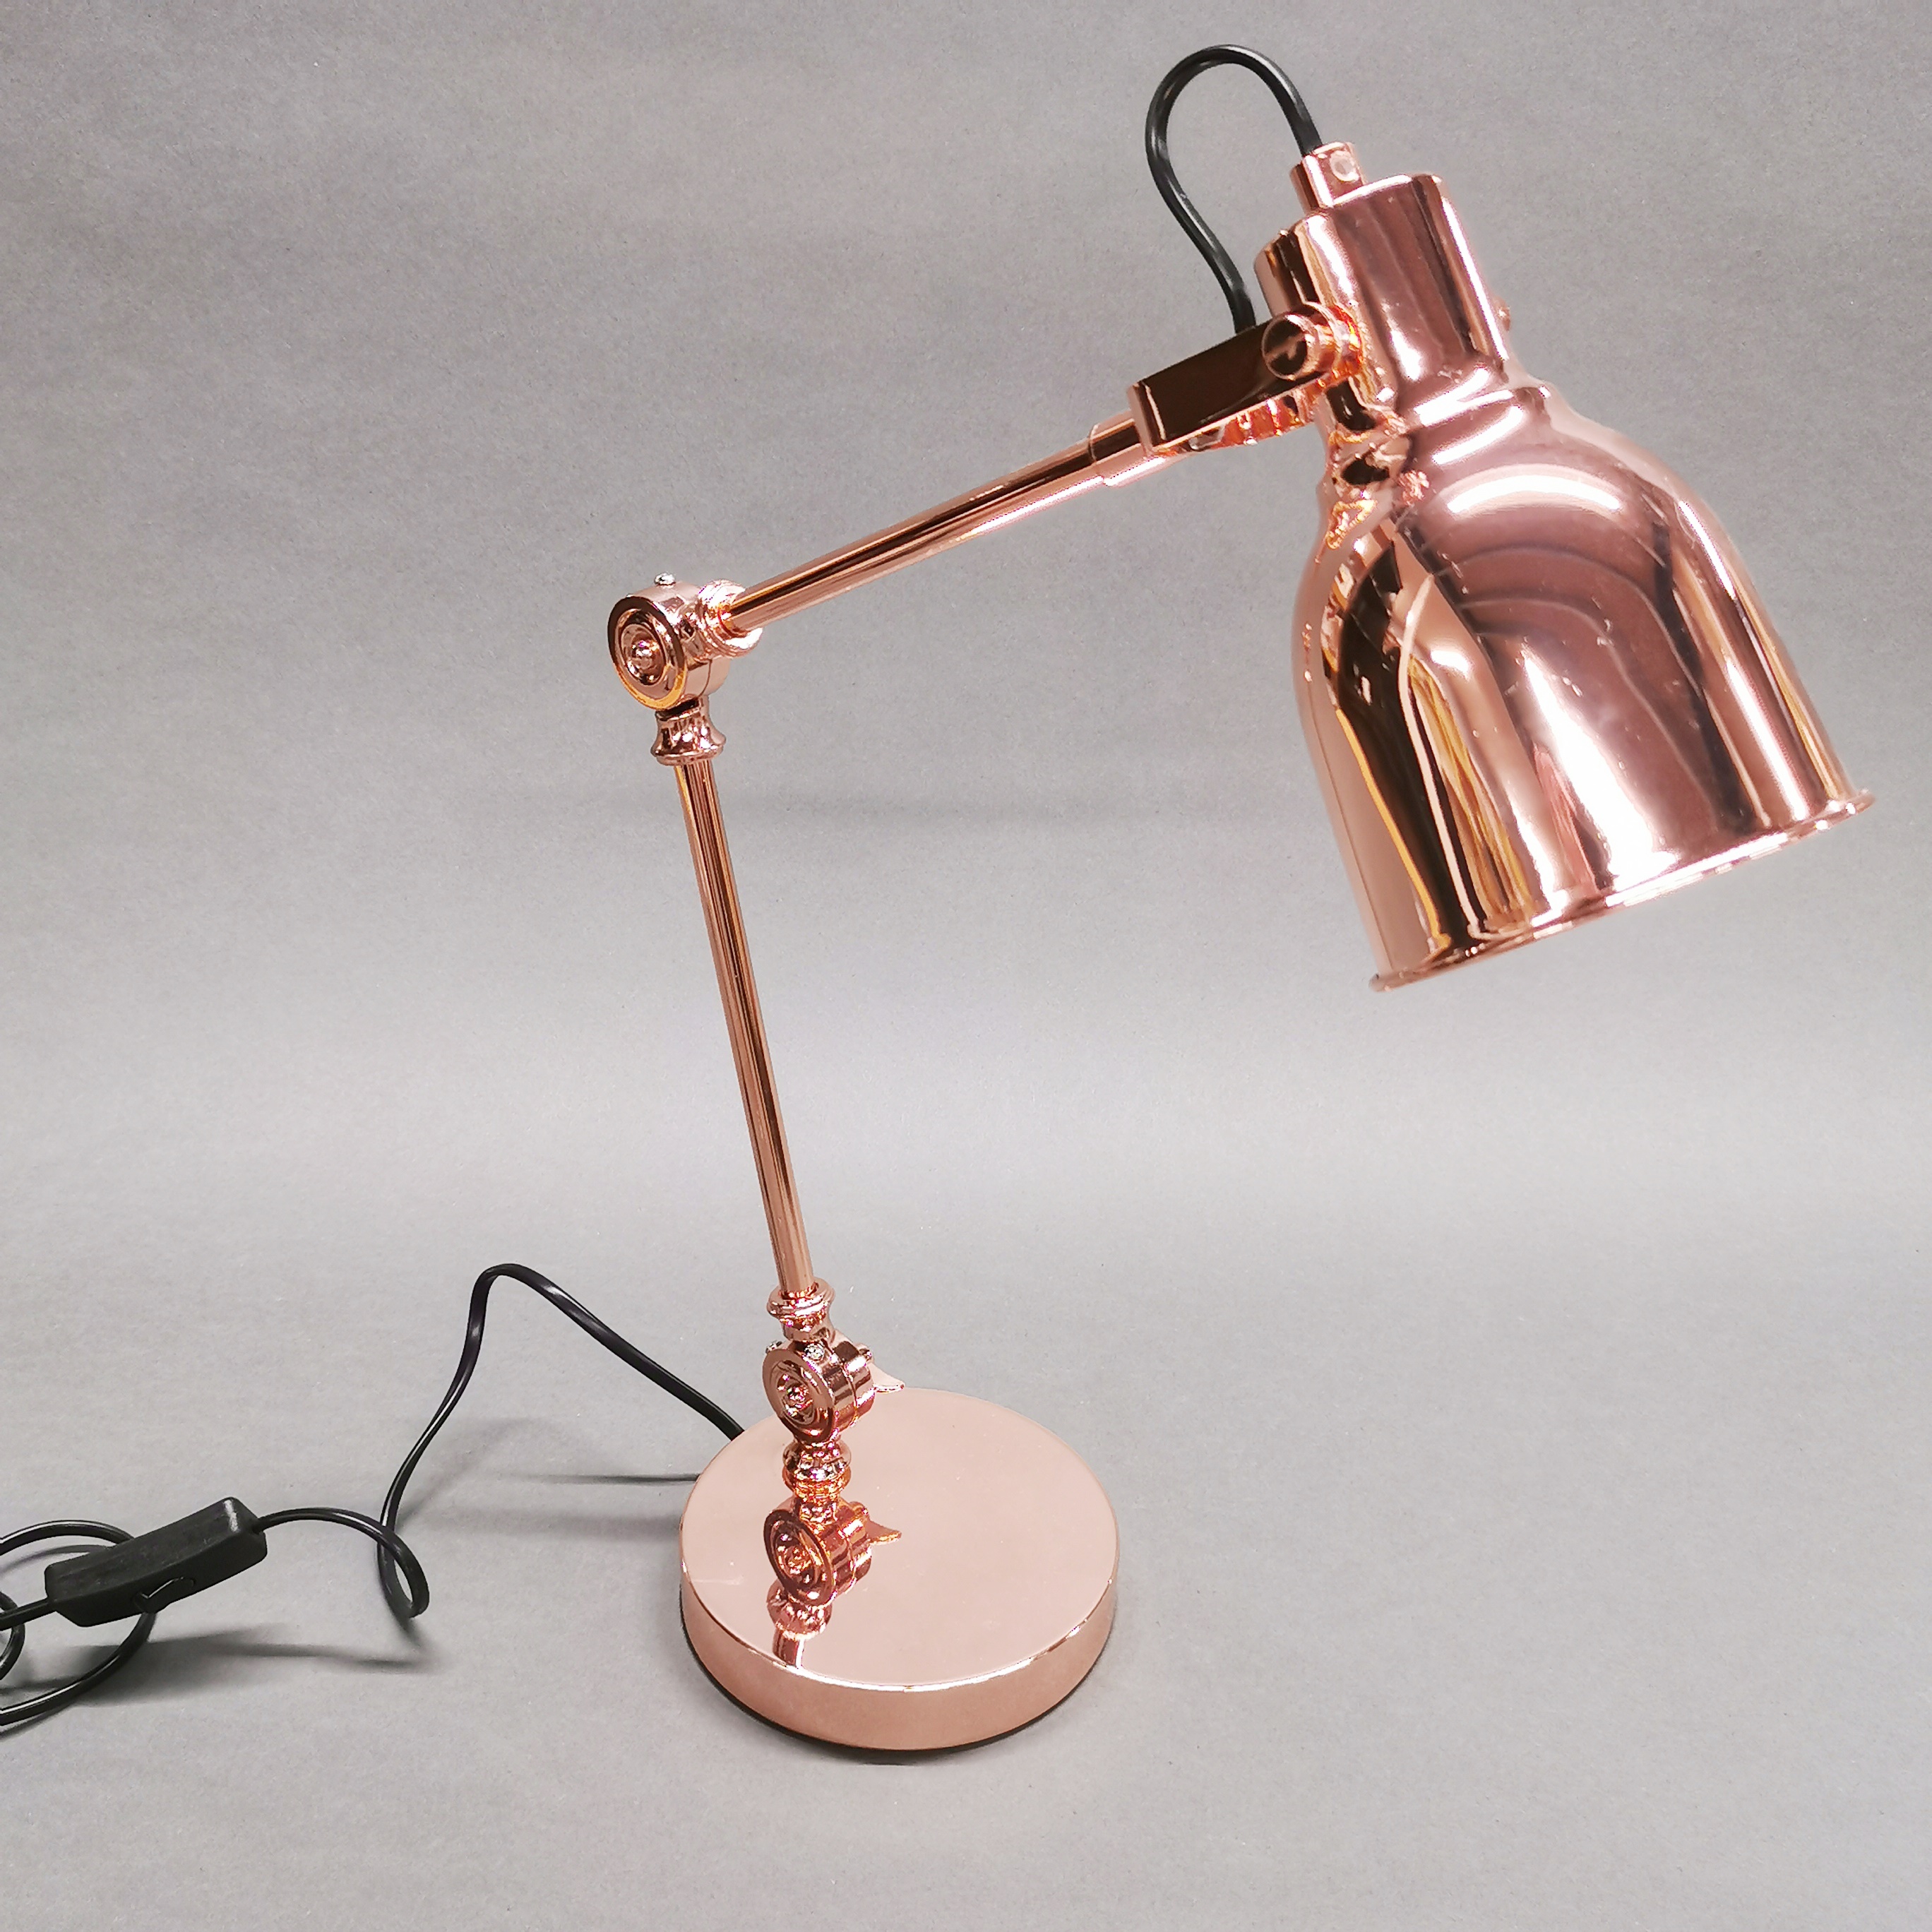 A copperised angle desk lamp. - Image 2 of 2